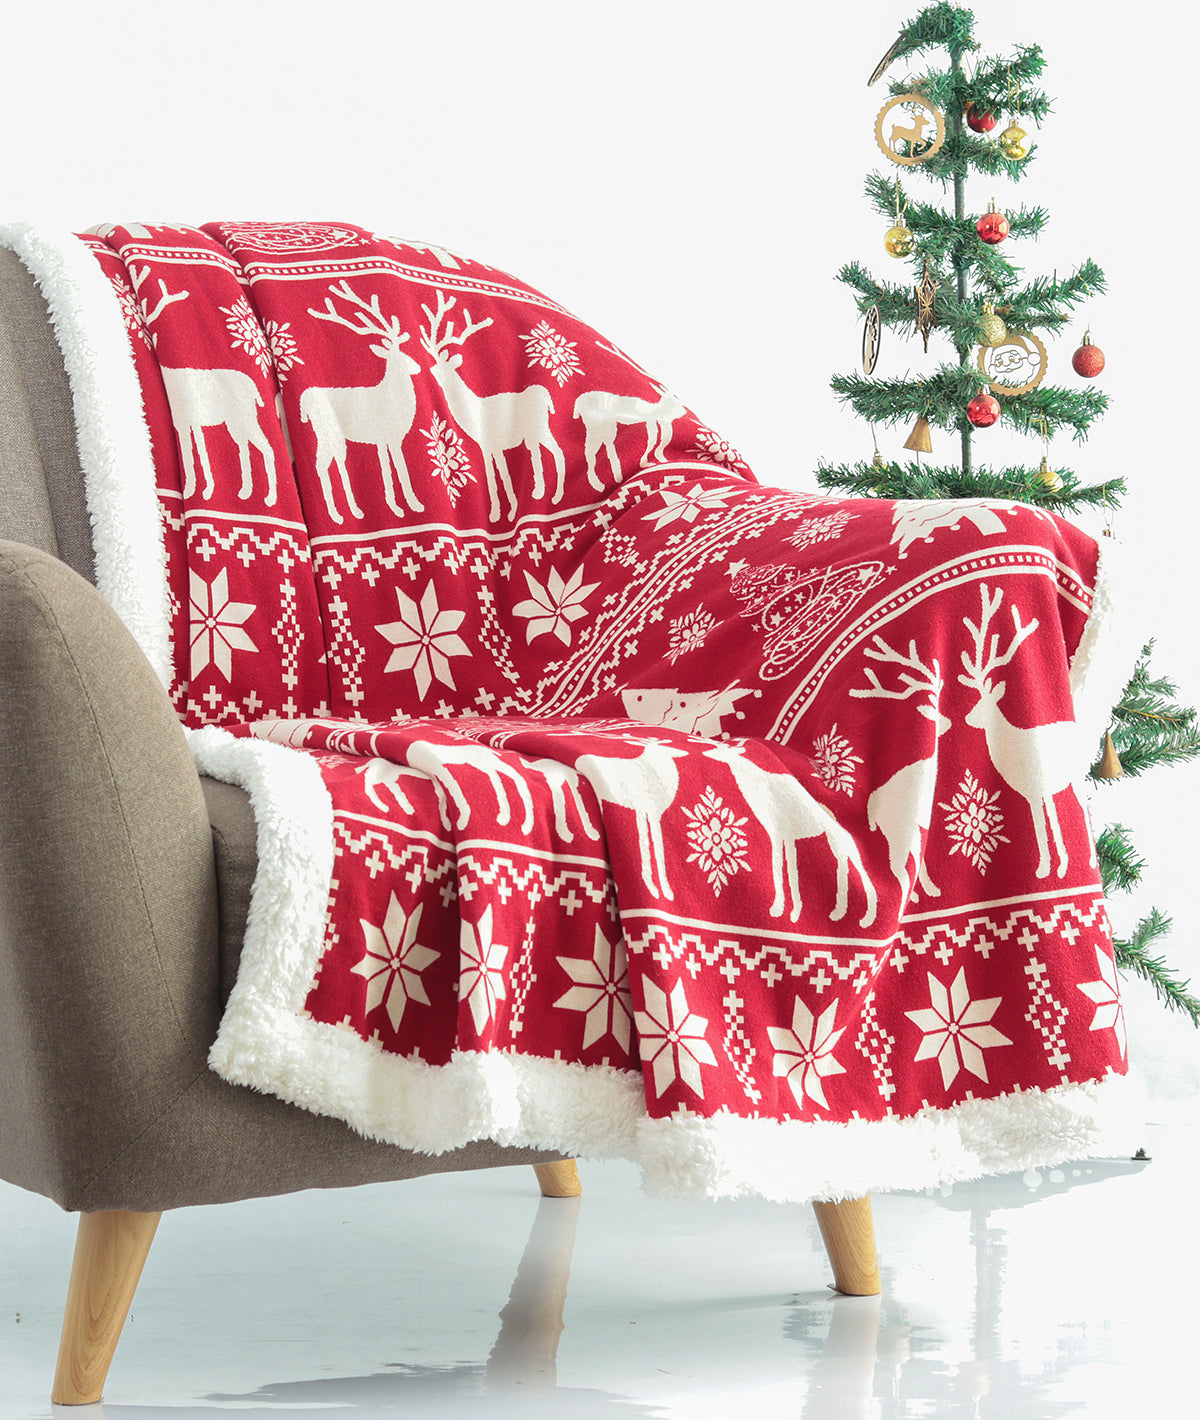 Moose Christmas Tree Cotton Knitted Kids Blanket with Warm Sherpa Fabric (Red & Natural)